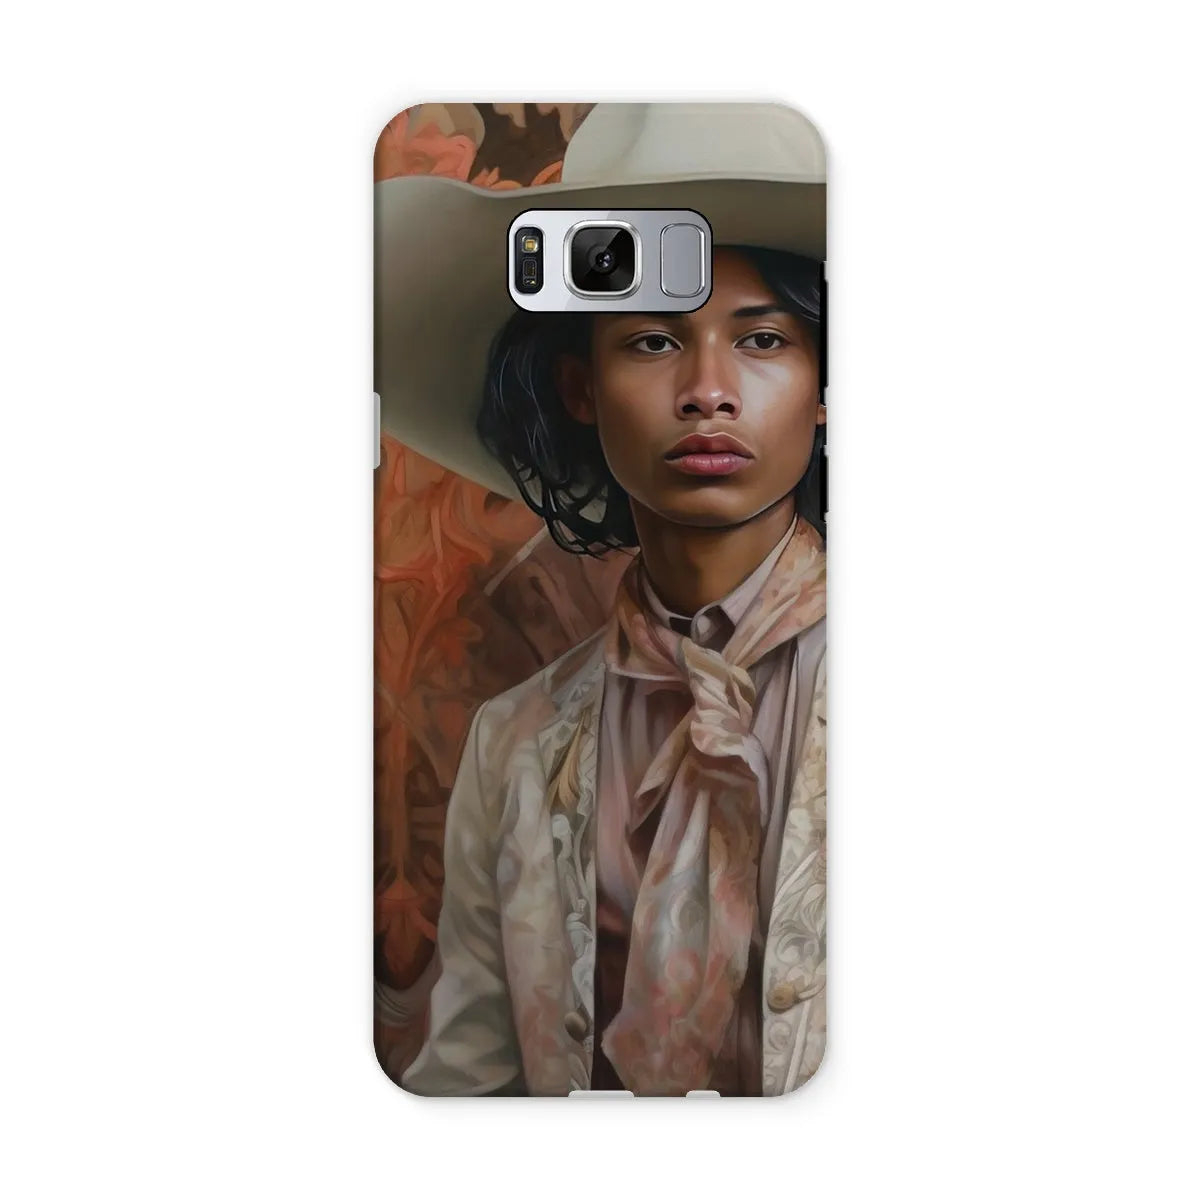 Arjuna The Gay Cowboy - Gay Aesthetic Art Phone Case - Samsung Galaxy S8 / Matte - Mobile Phone Cases - Aesthetic Art